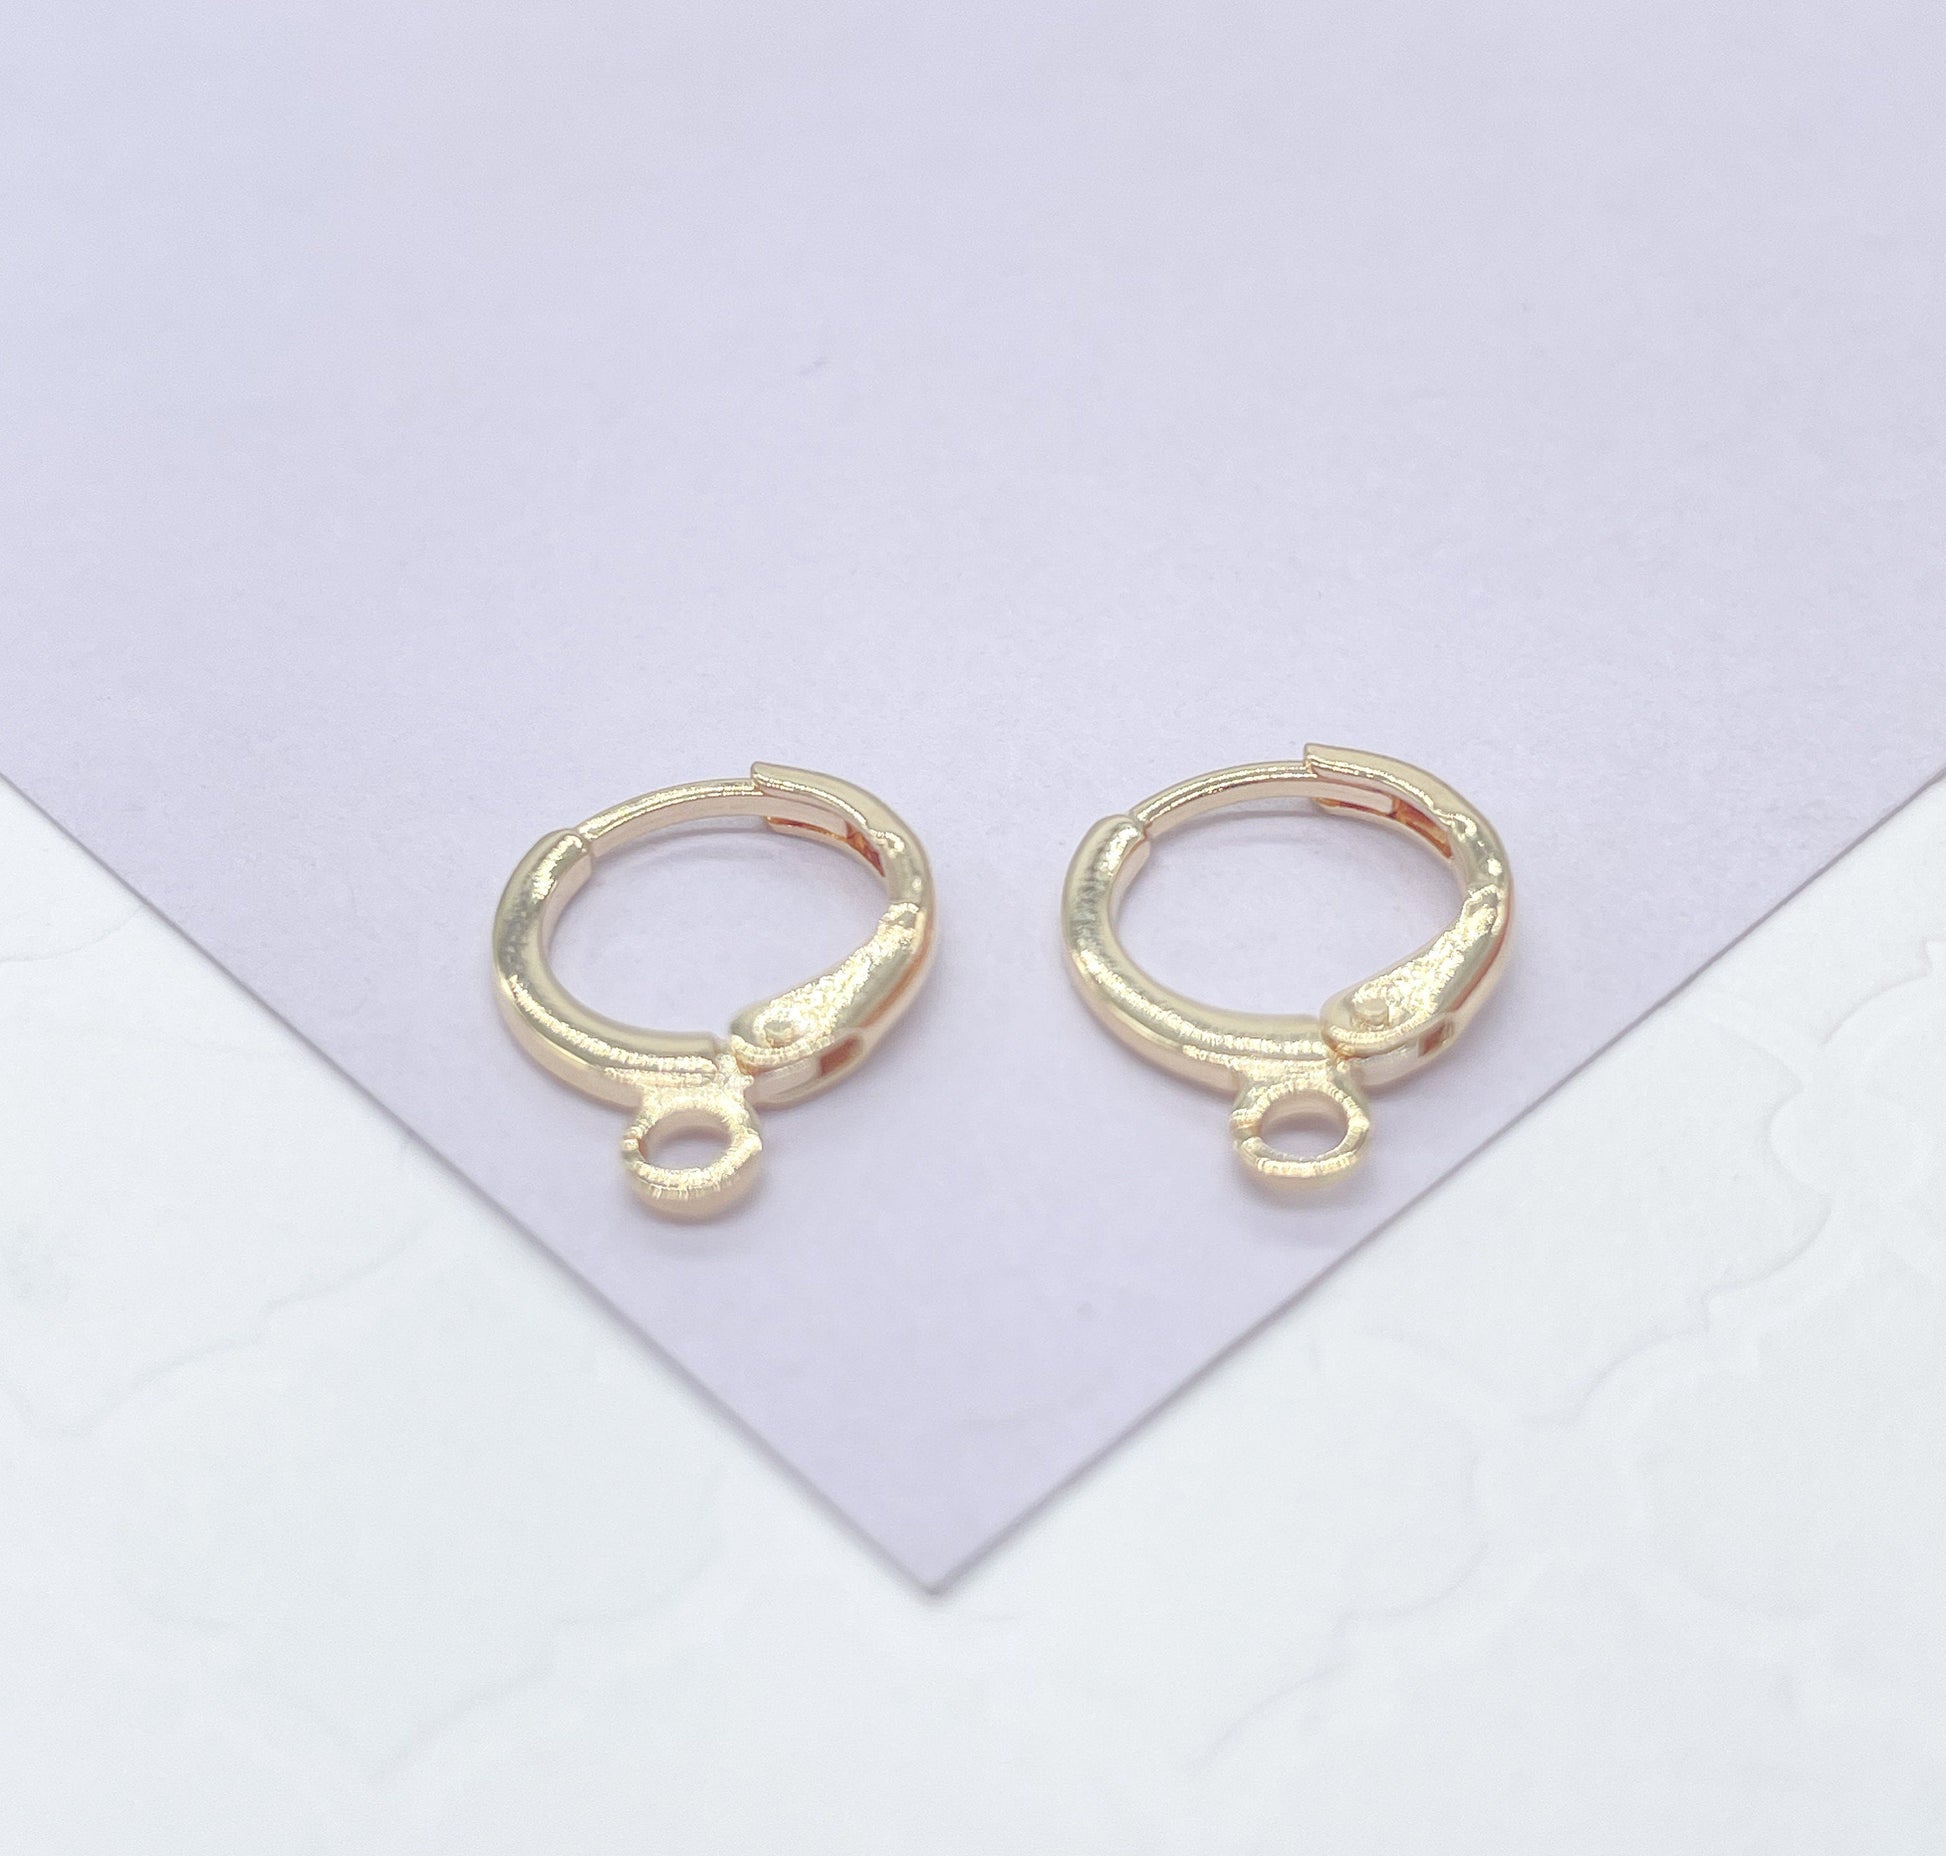 18k Gold Filled Plain Round Hoops Clasps